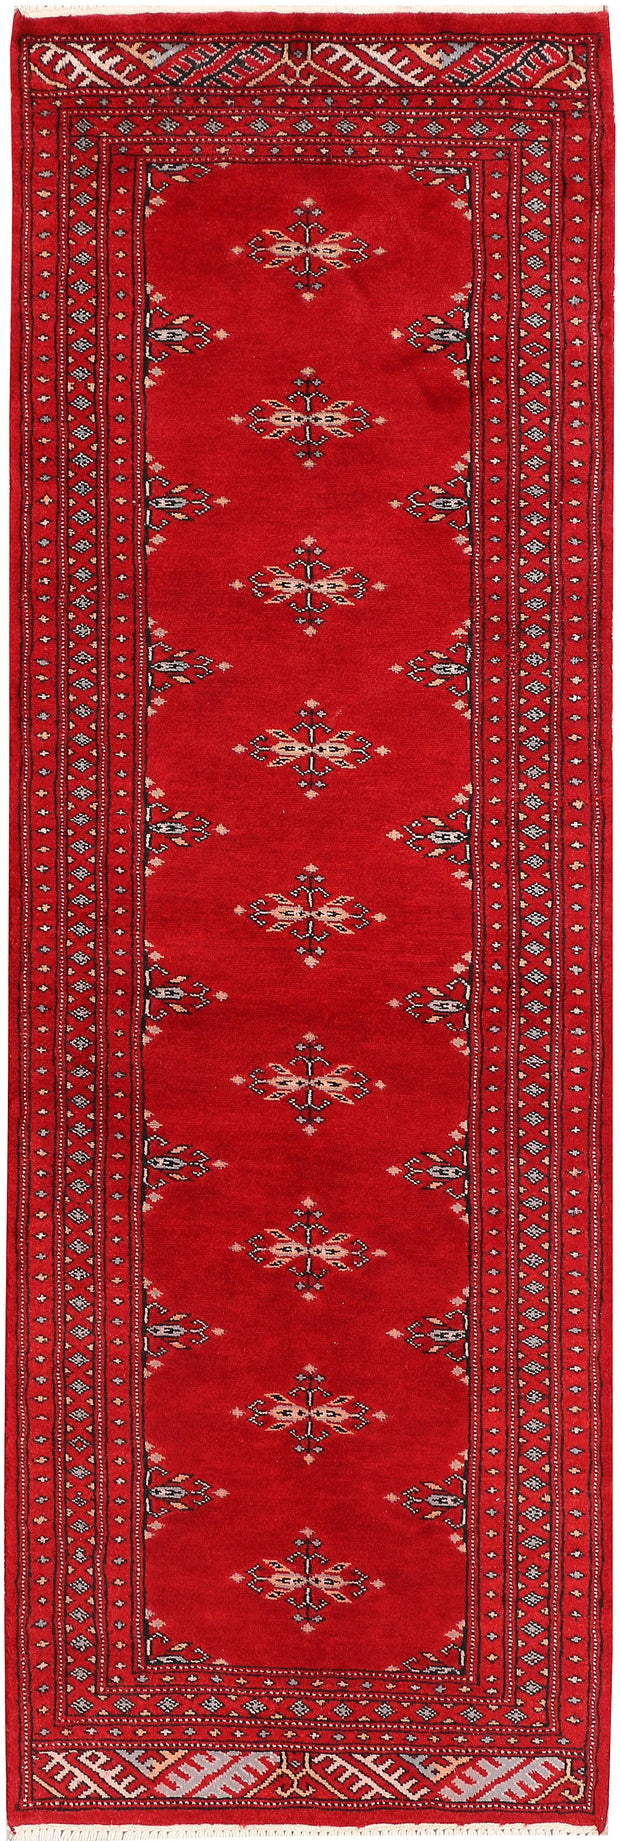 Red Butterfly 2' x 6' 2 - No. 46494 - ALRUG Rug Store